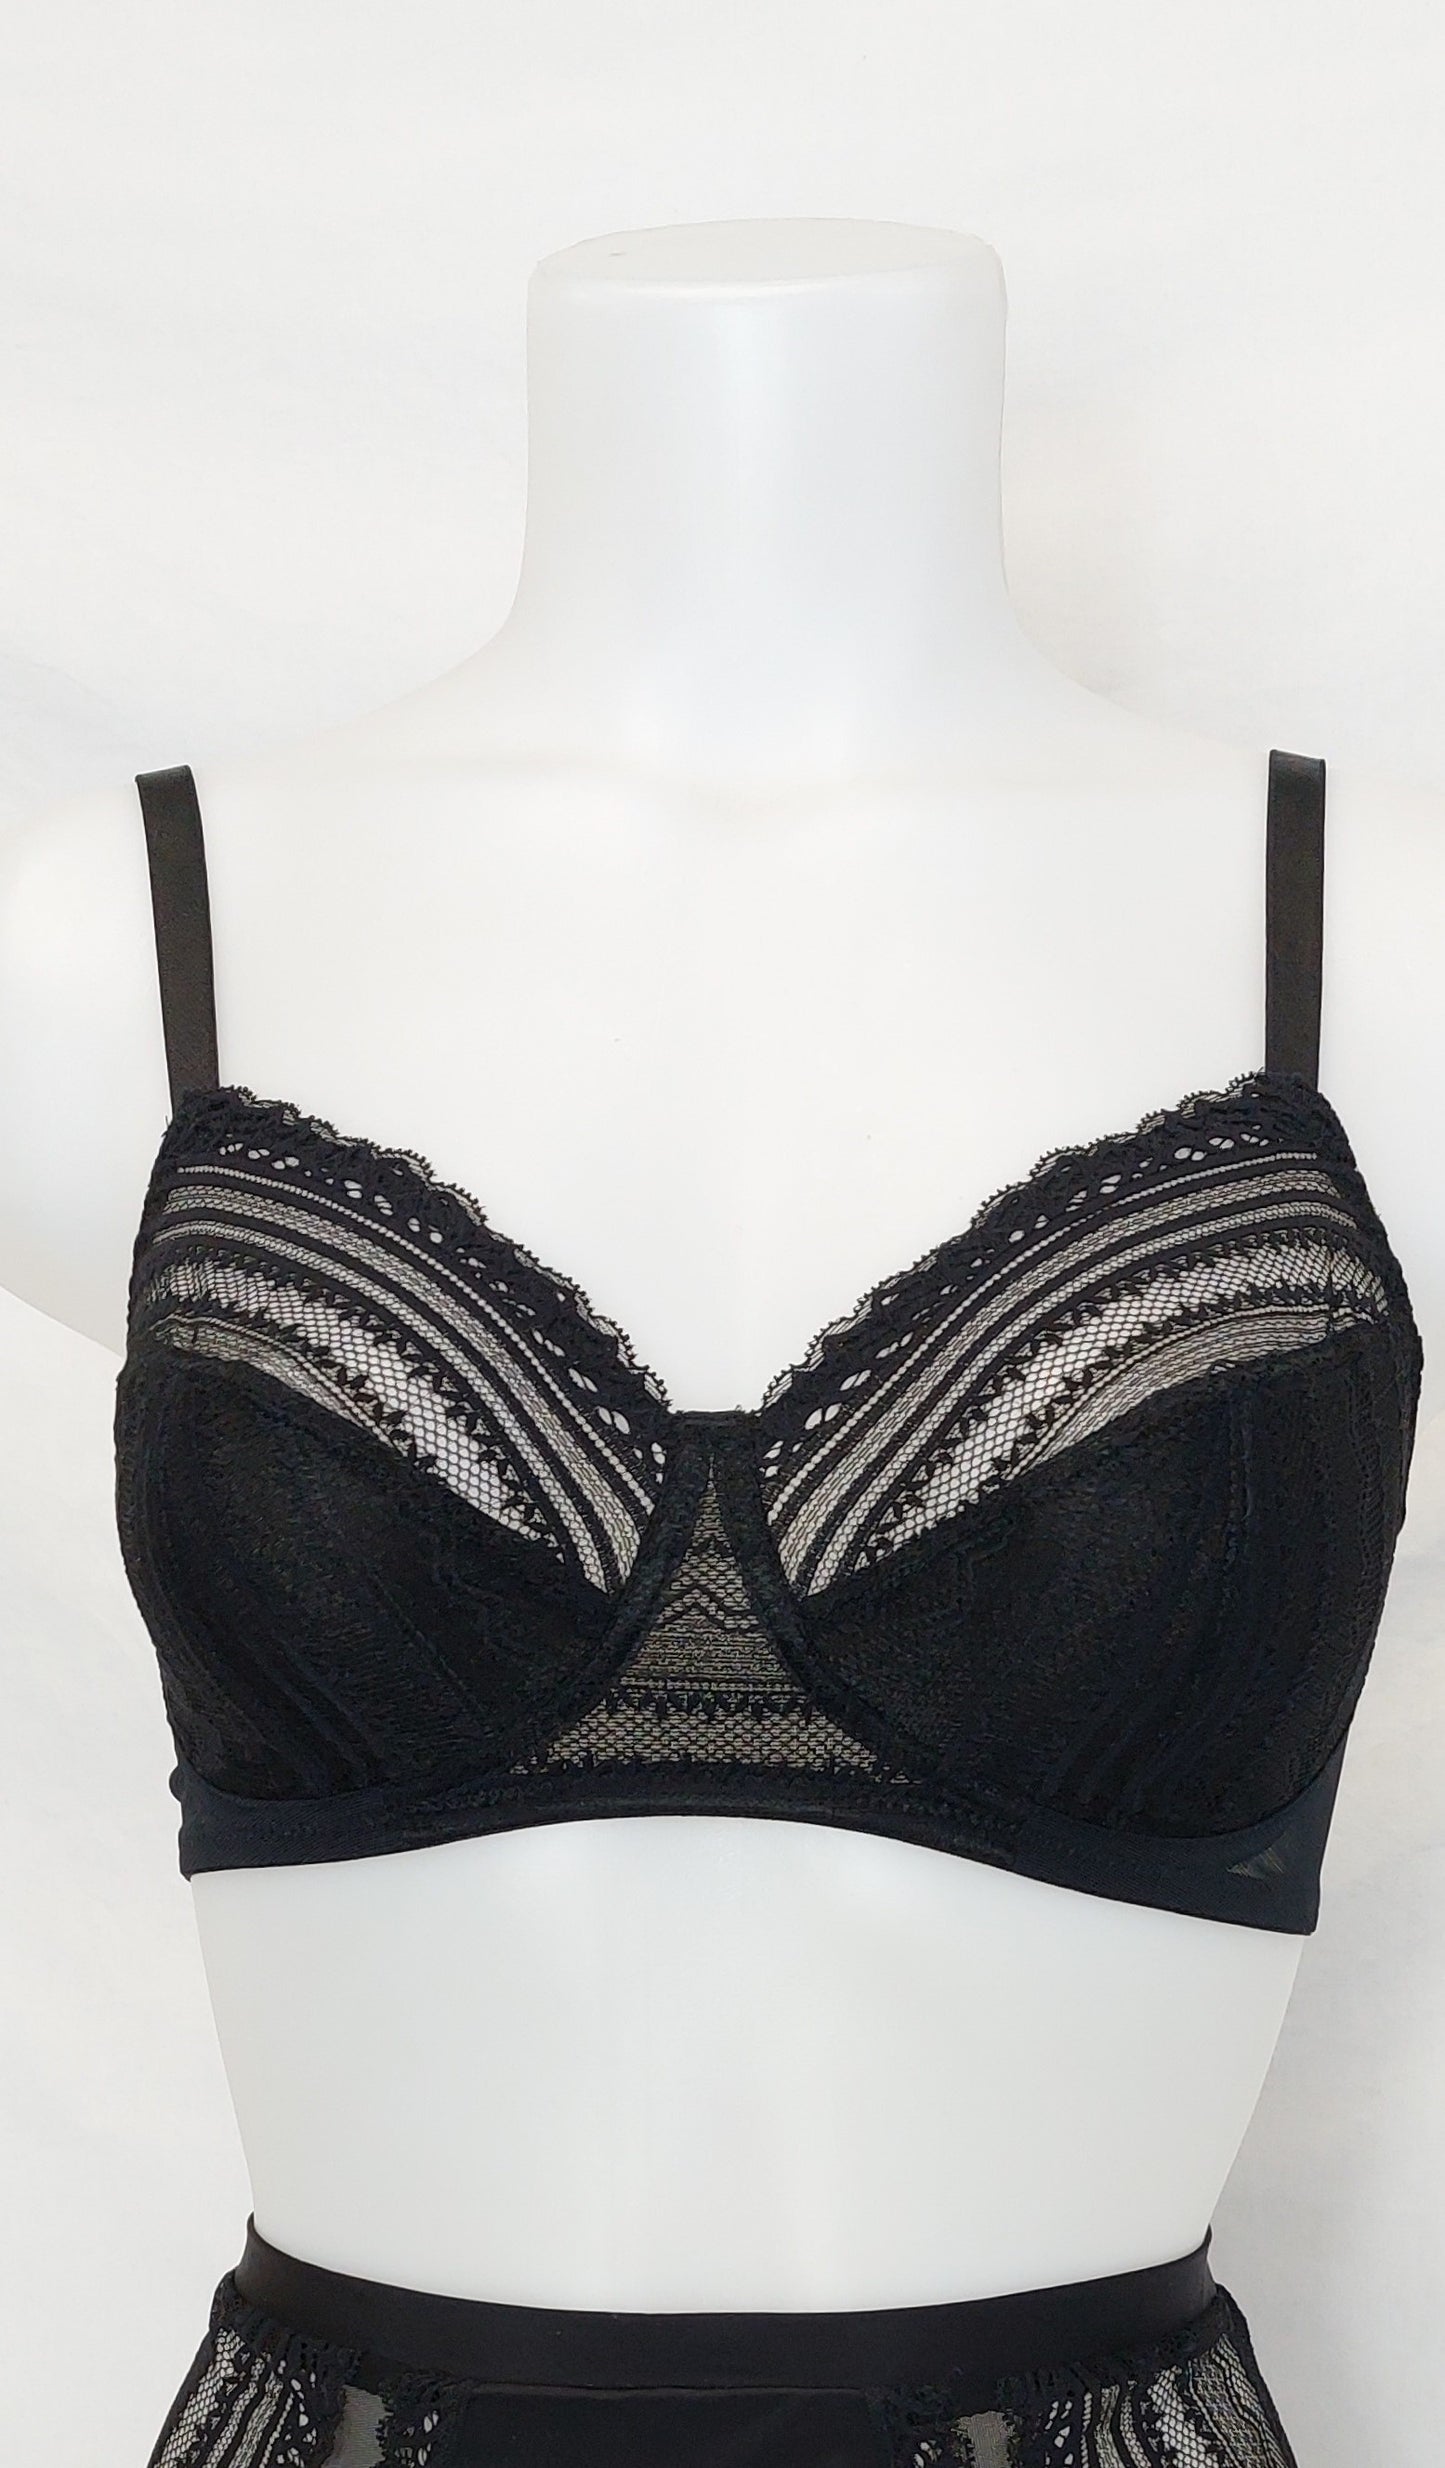 Bra Black Lace Non-Padded Non-Wired Everyday